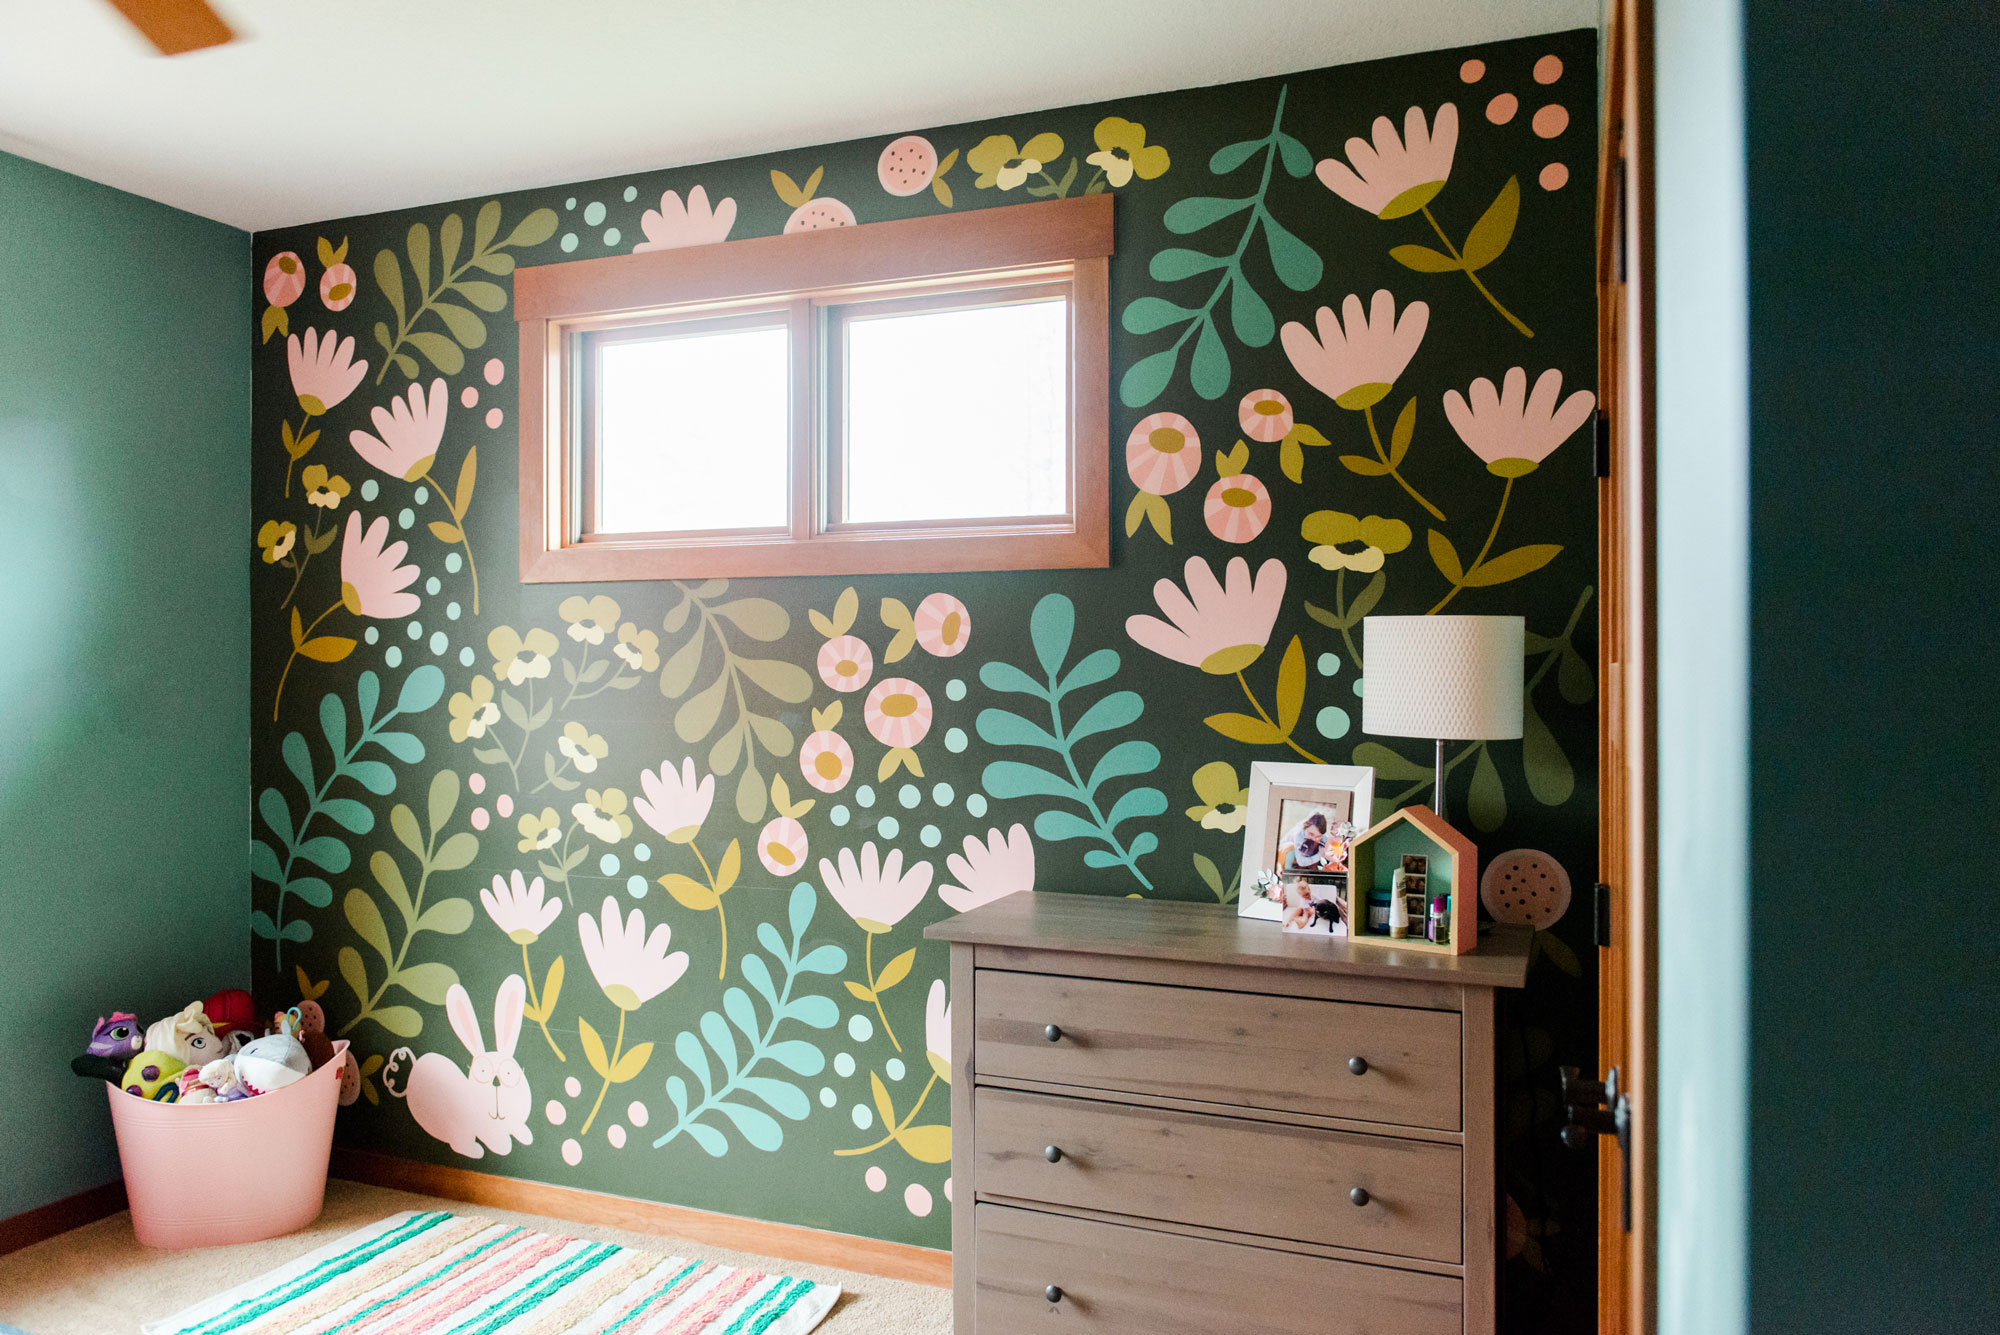 How to paint a floral wall mural, Floral painting DIY, bedroom mural, bedroom floral mural, mural for a bedroom, floral bedroom mural